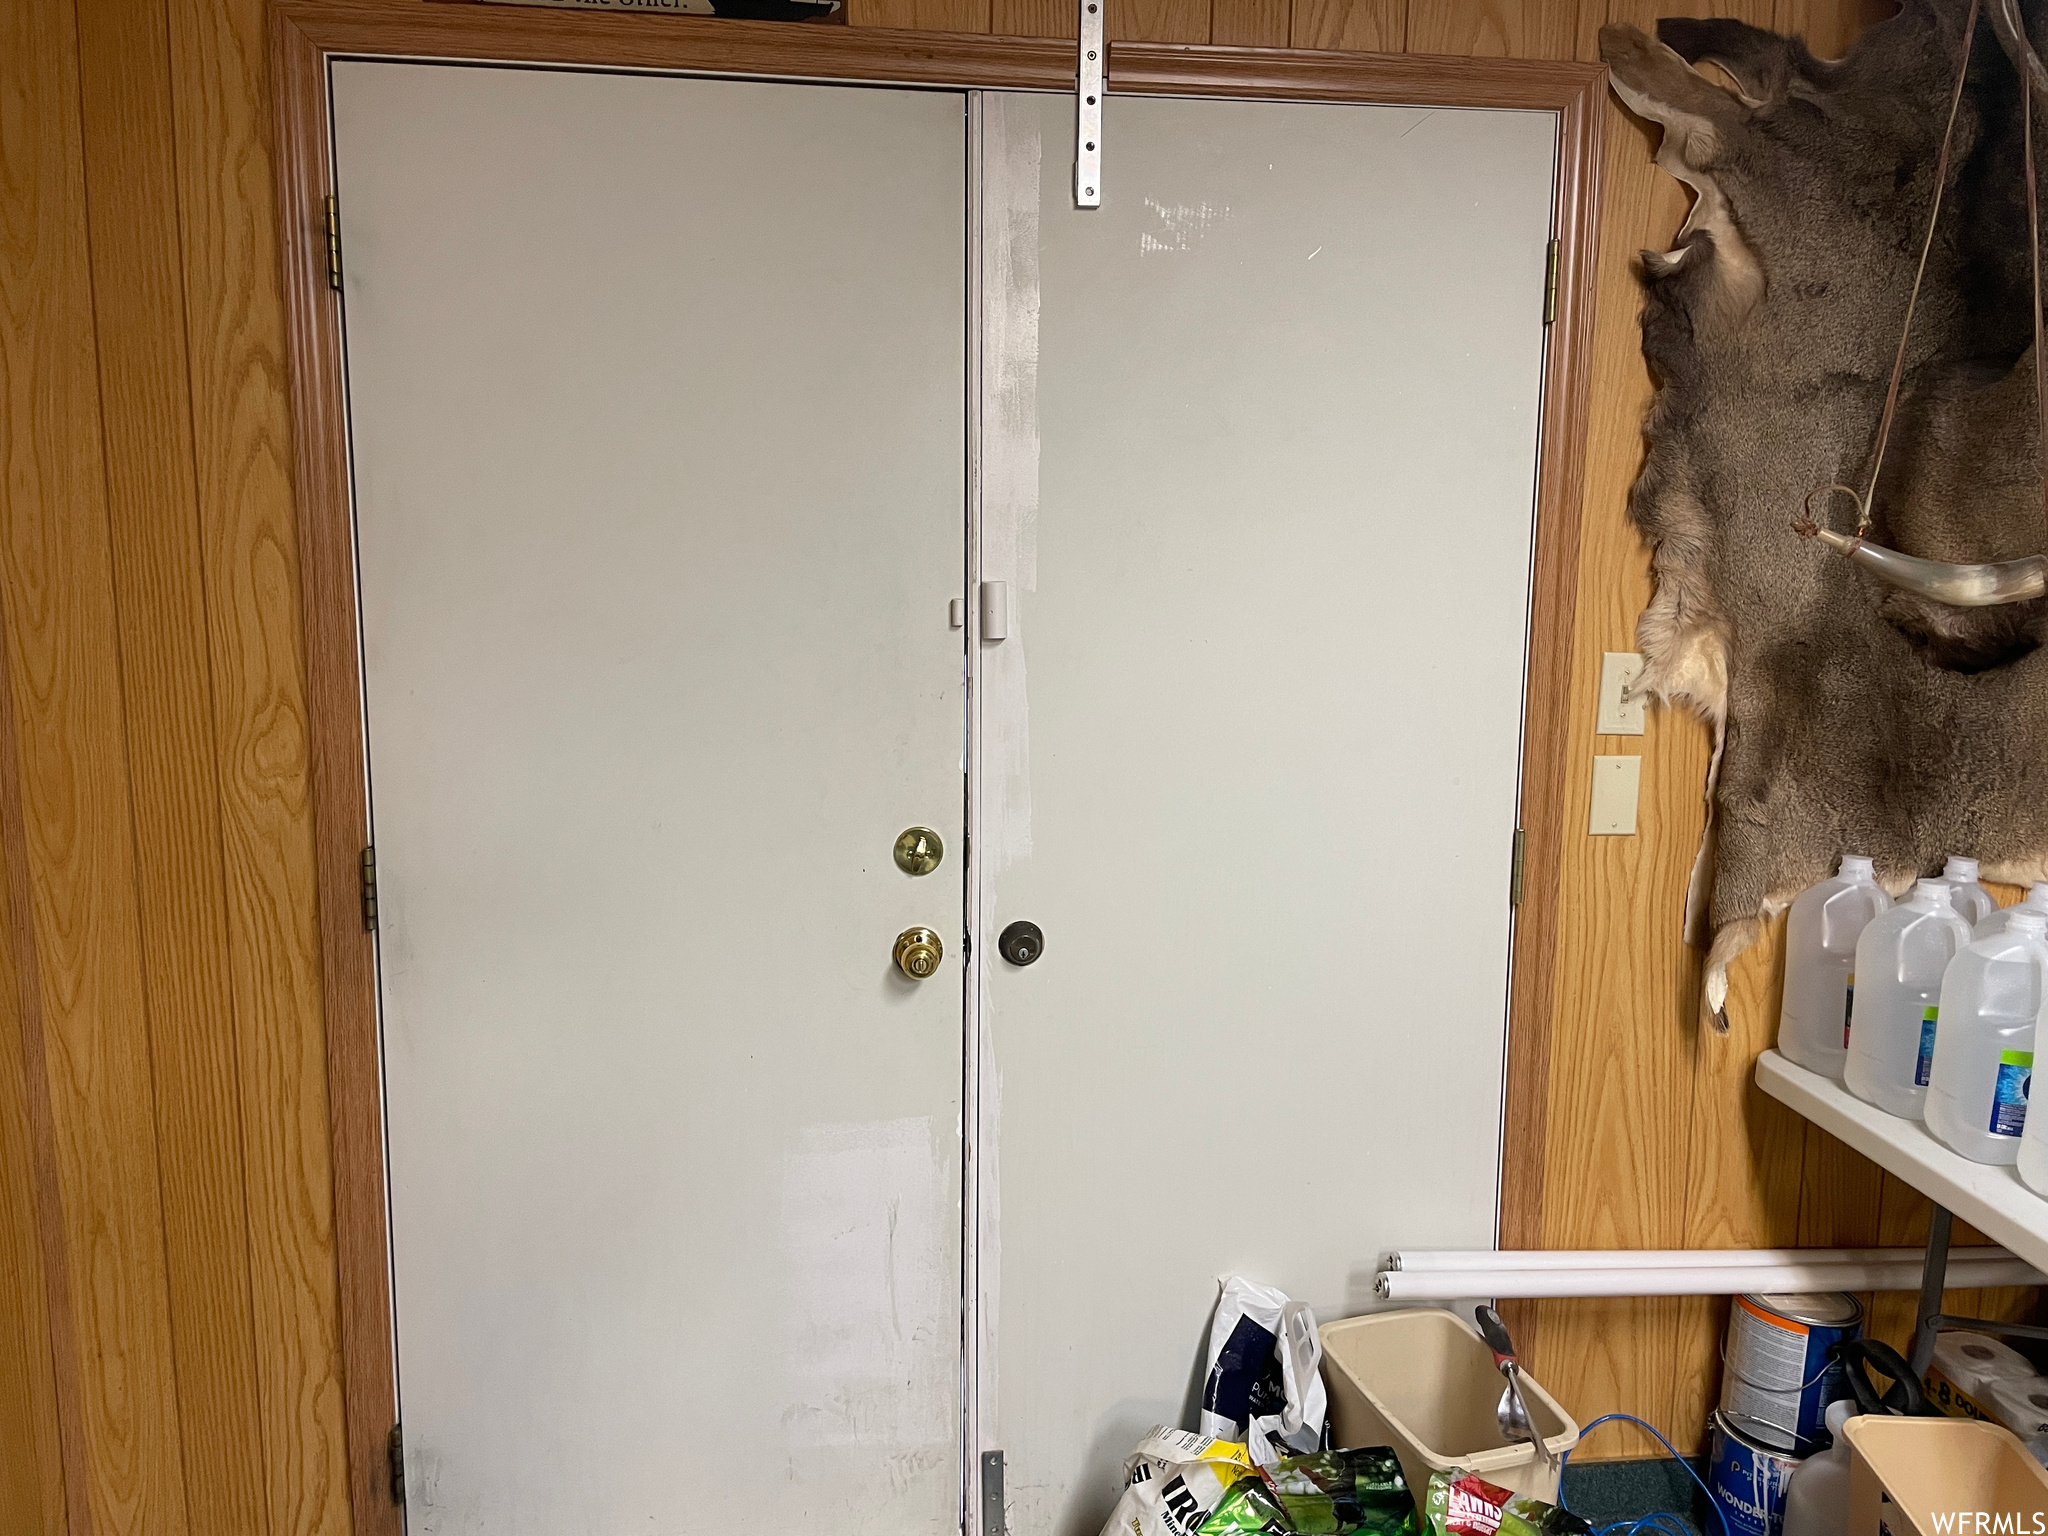 French Doors off of storage space